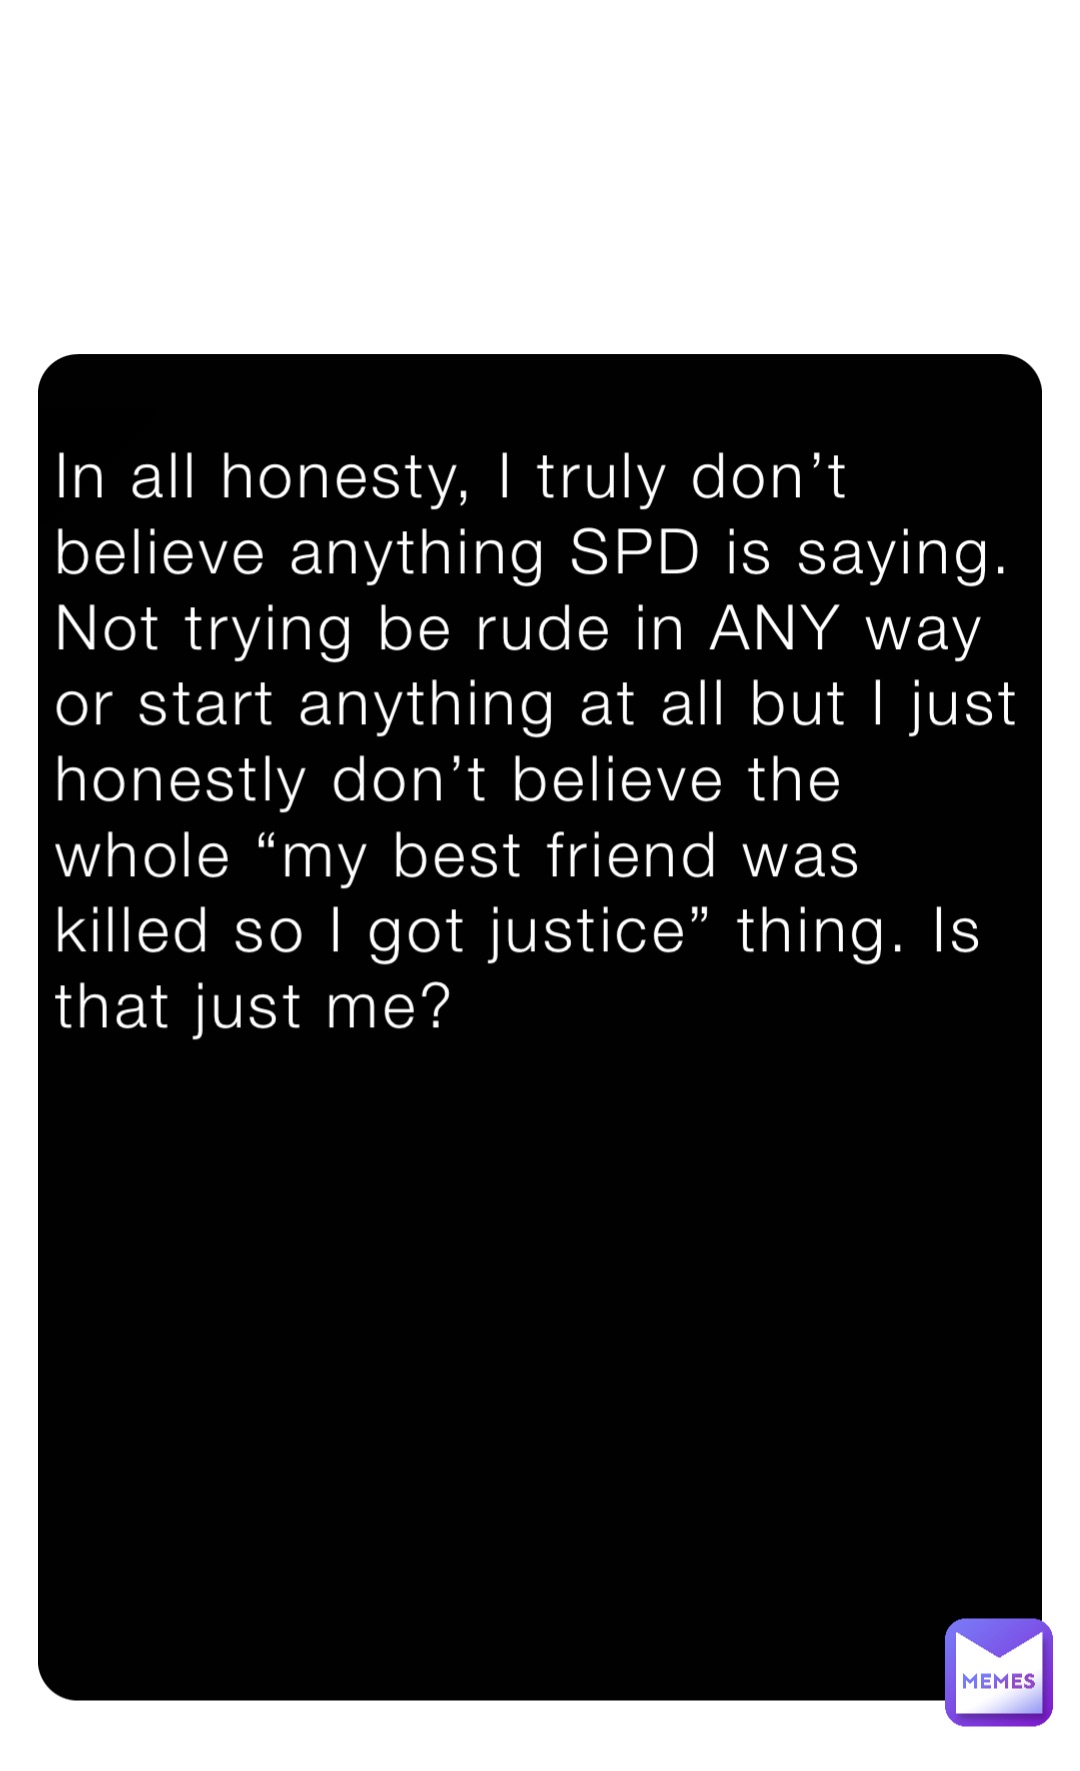 In all honesty, I truly don’t believe anything SPD is saying. Not trying be rude in ANY way or start anything at all but I just honestly don’t believe the whole “my best friend was killed so I got justice” thing. Is that just me?